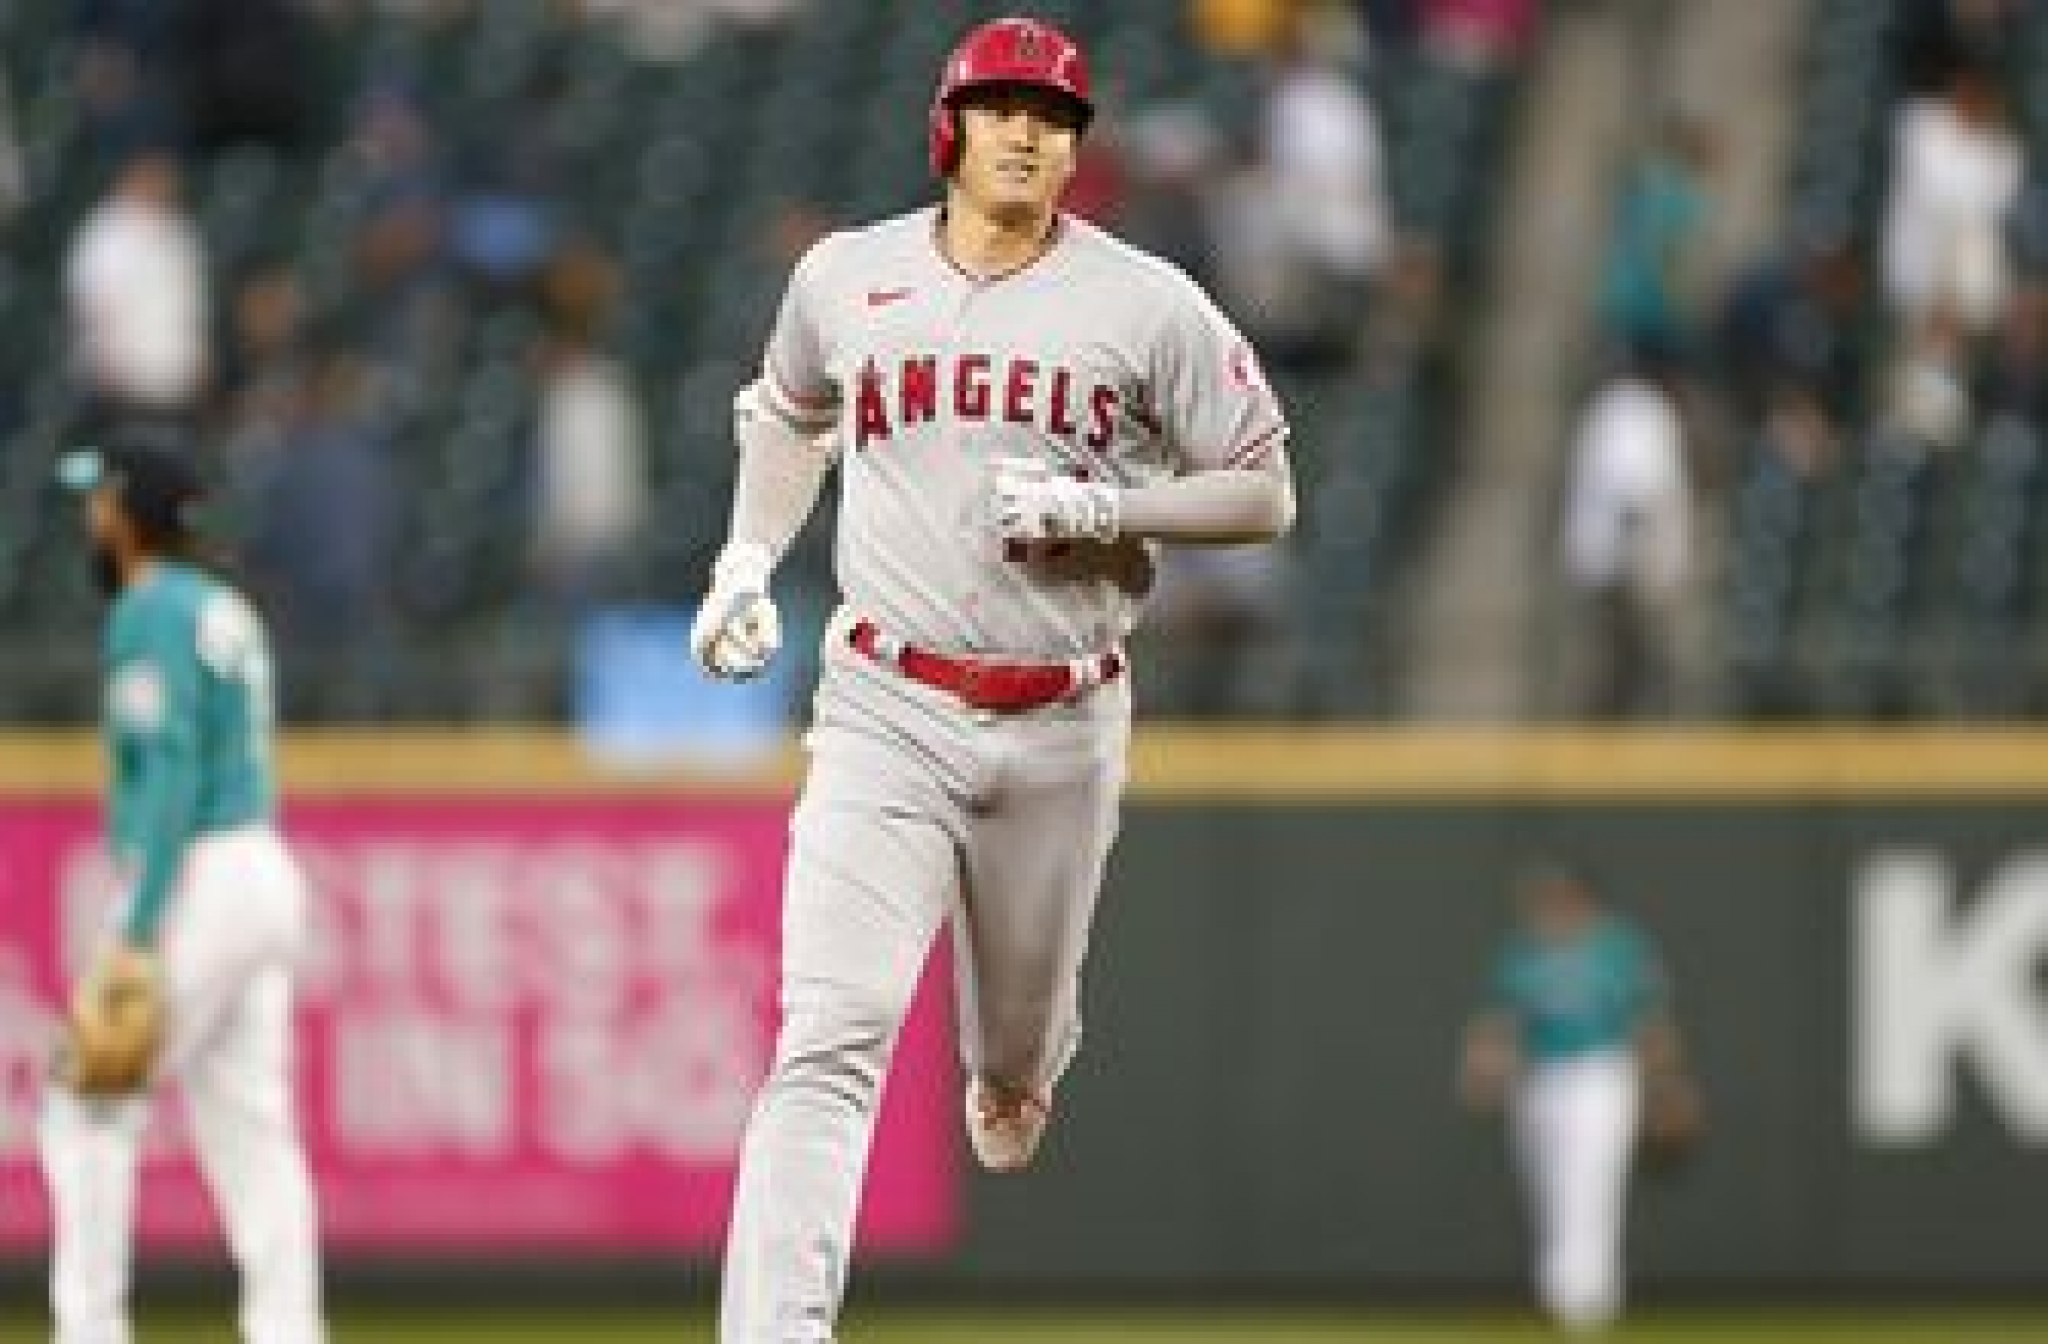 Shohei Ohtani clubs eighth homer of 2021, but Angels fall 7-4 to Mariners